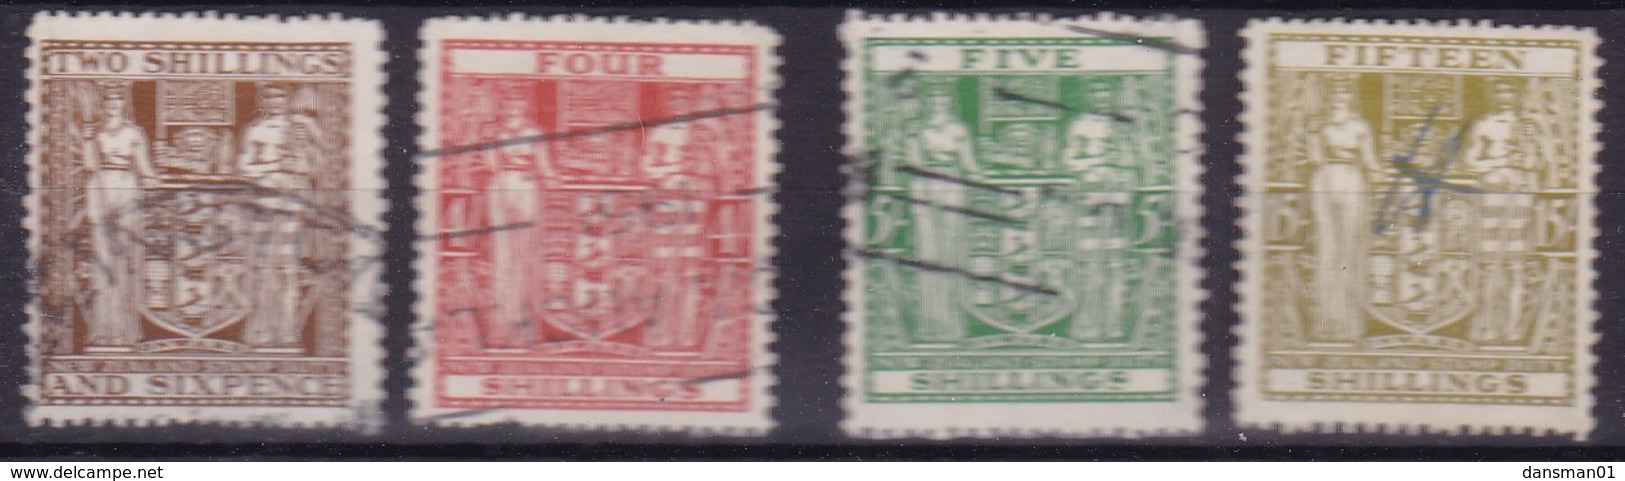 New Zealand Fiscals - Postal Fiscal Stamps